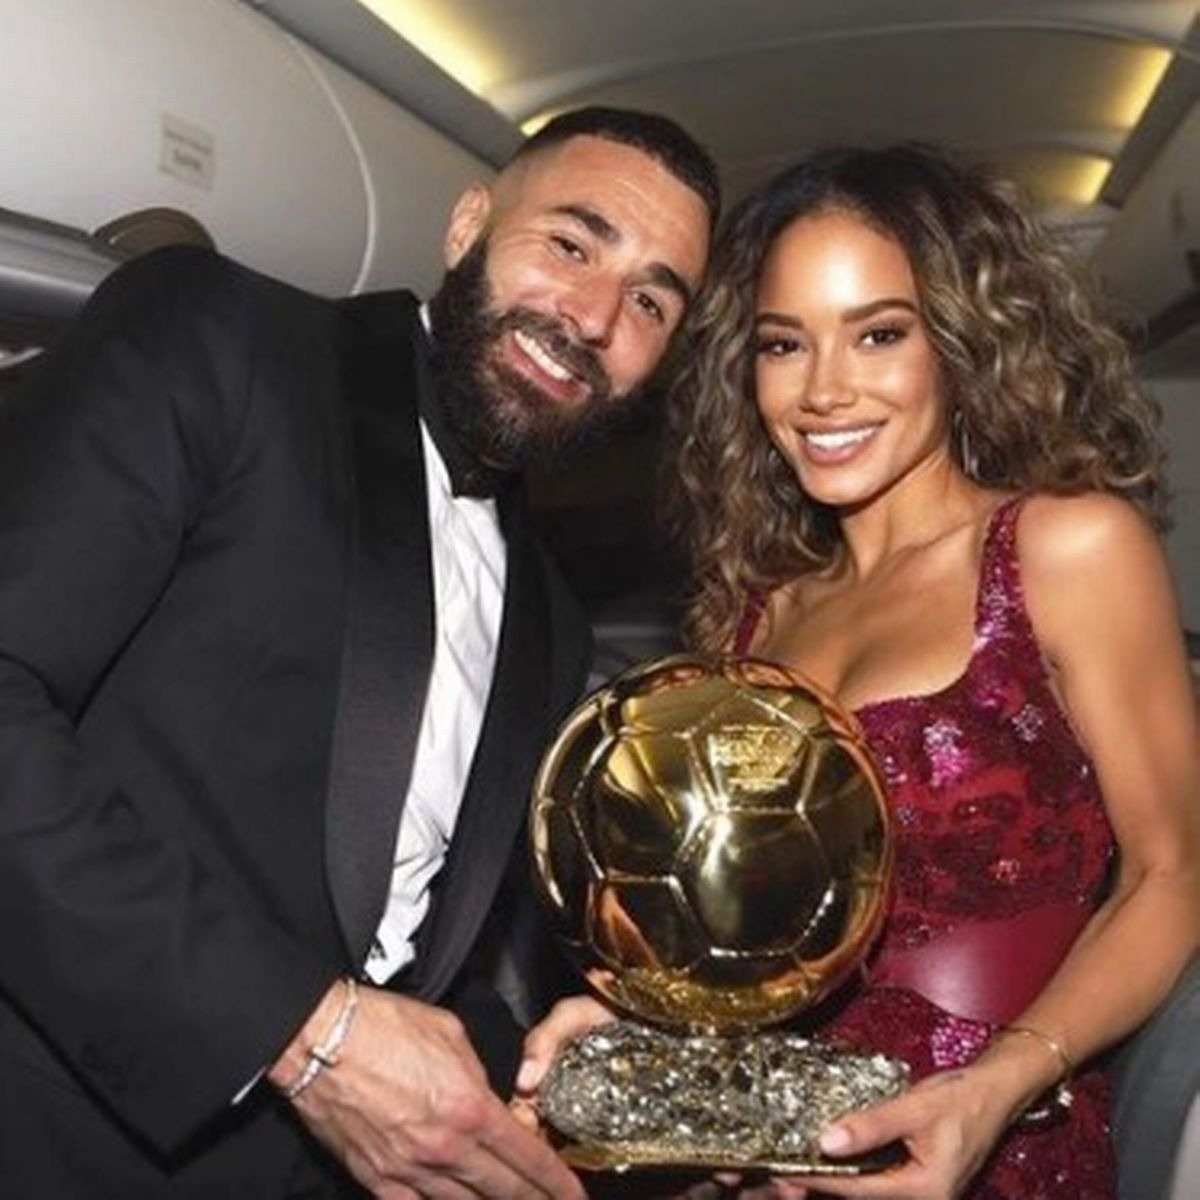 Karim Benzema dating Hooters waitress who attended Ballon d’Or ceremony with ex-partner ➤ Buzzday.info